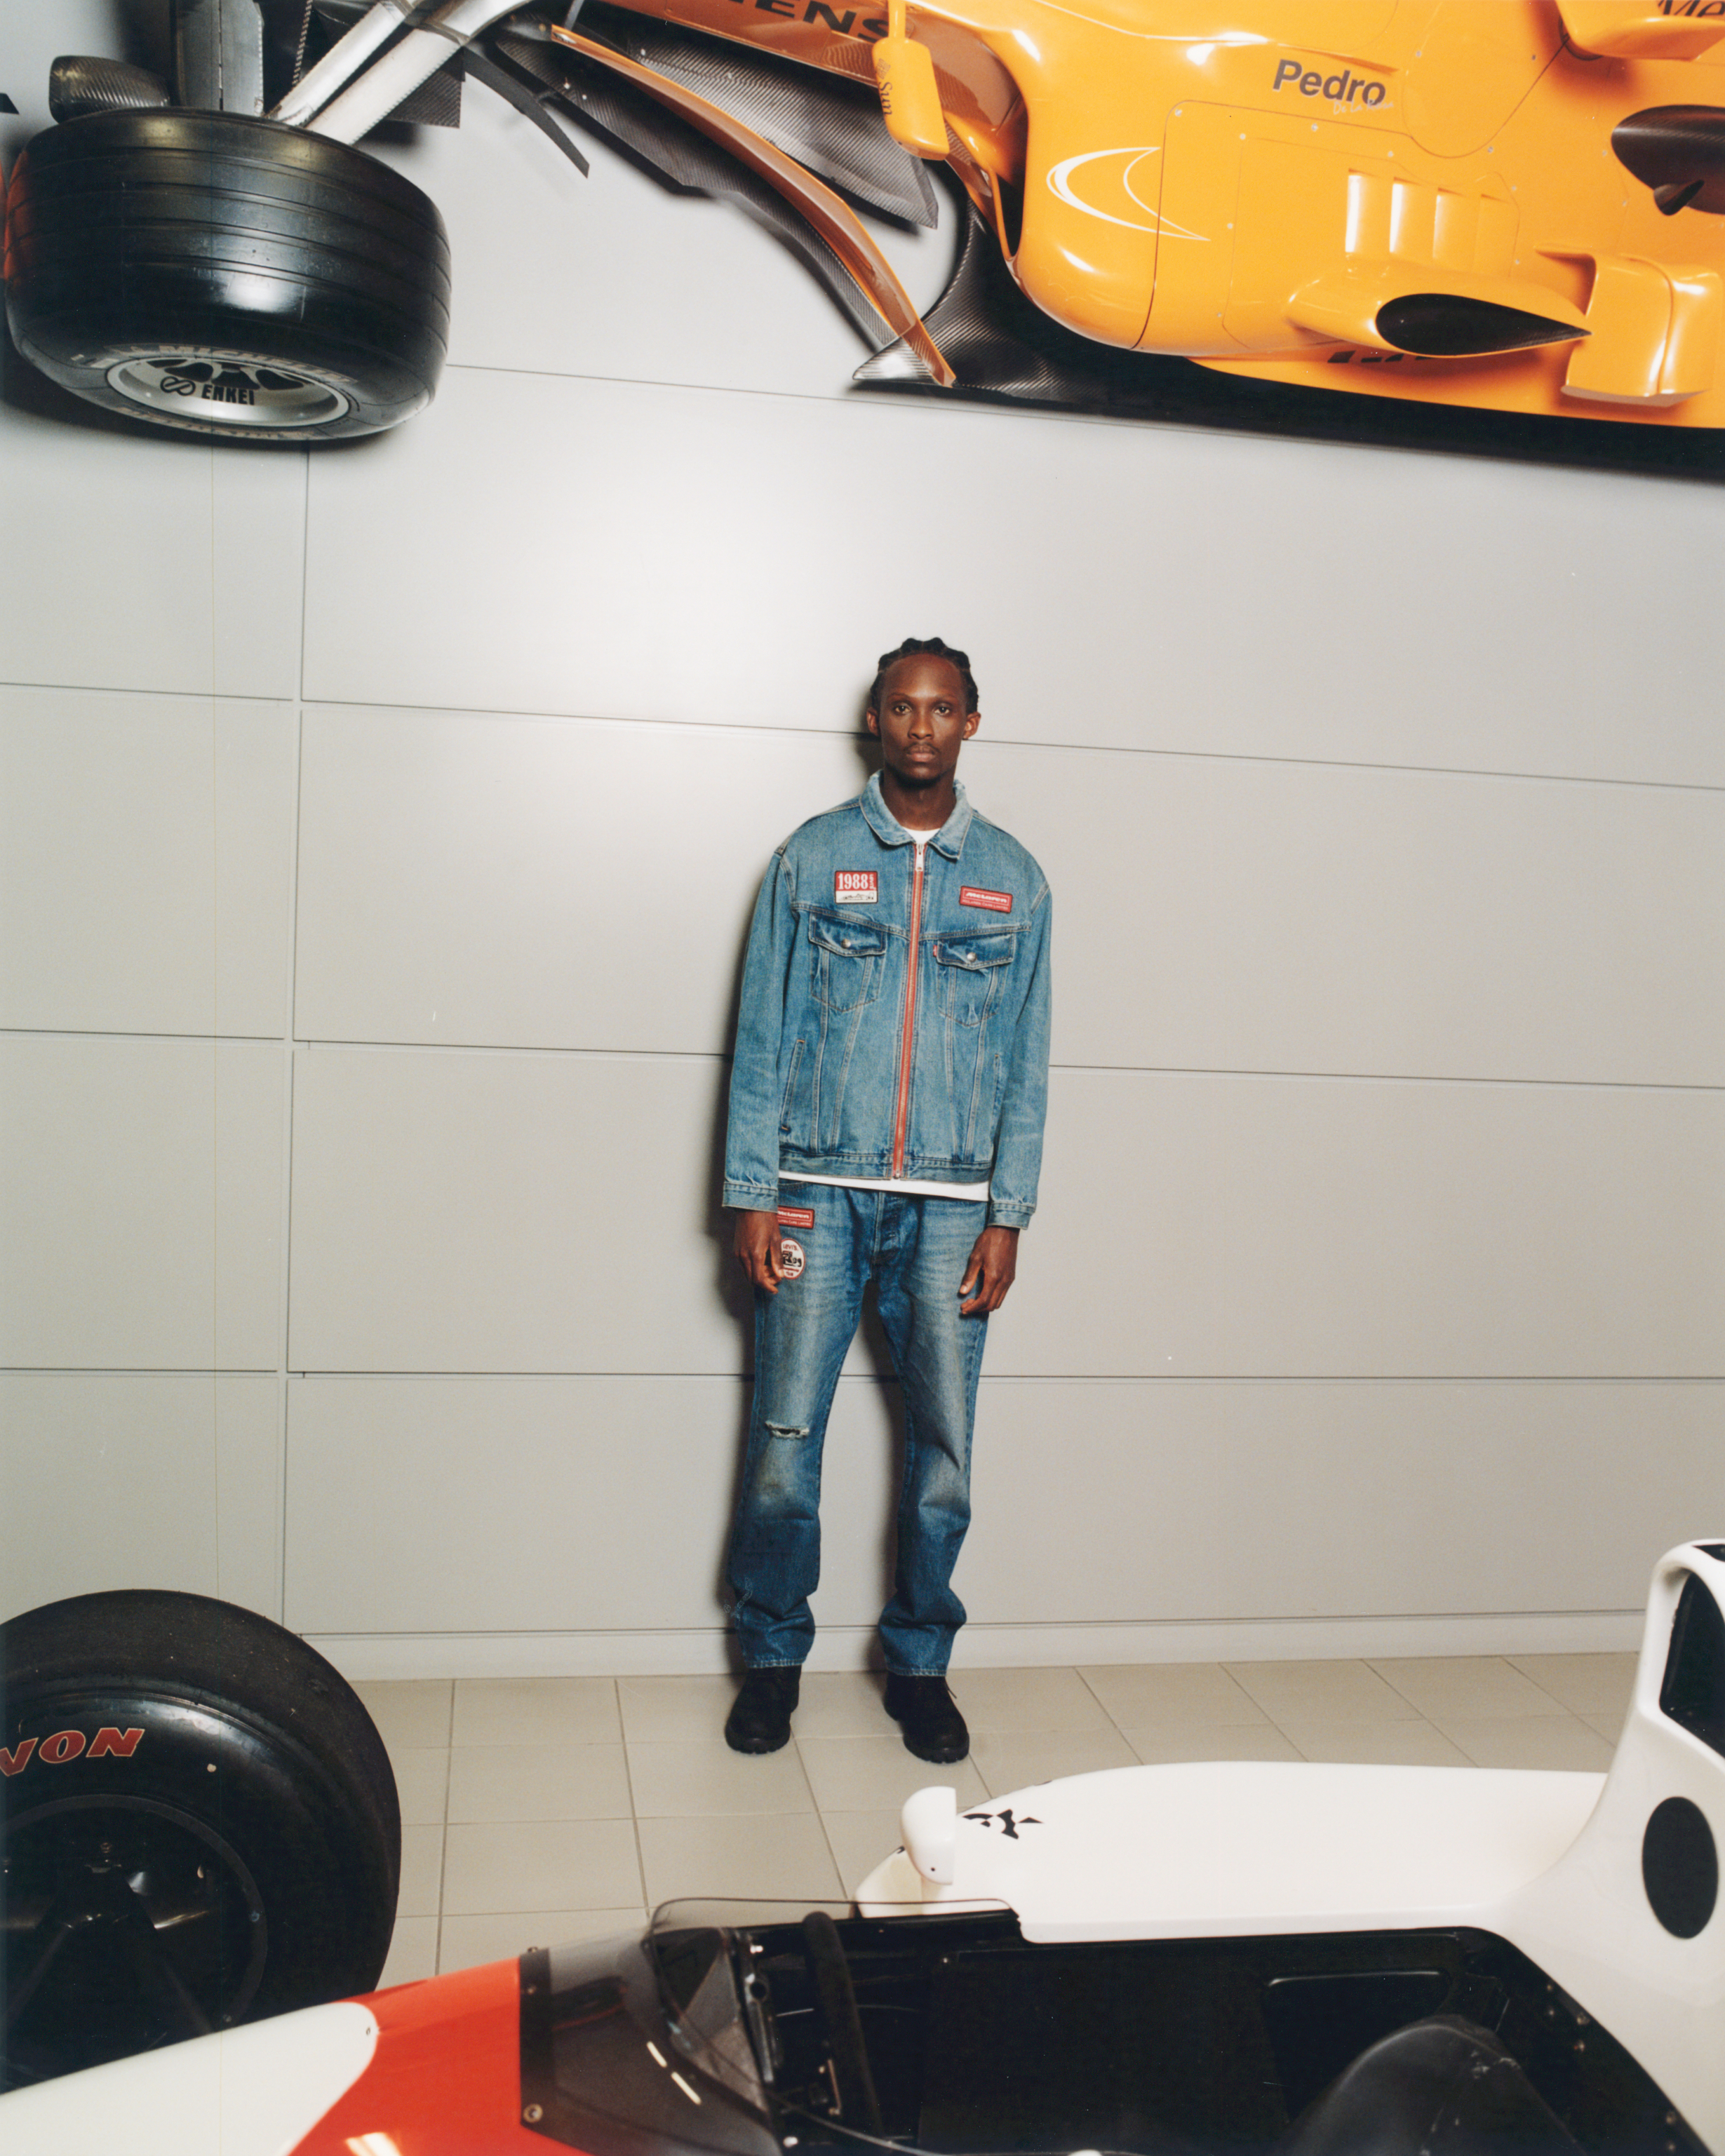 Person in denim jacket and jeans stands in front of a wall with racing car parts displayed